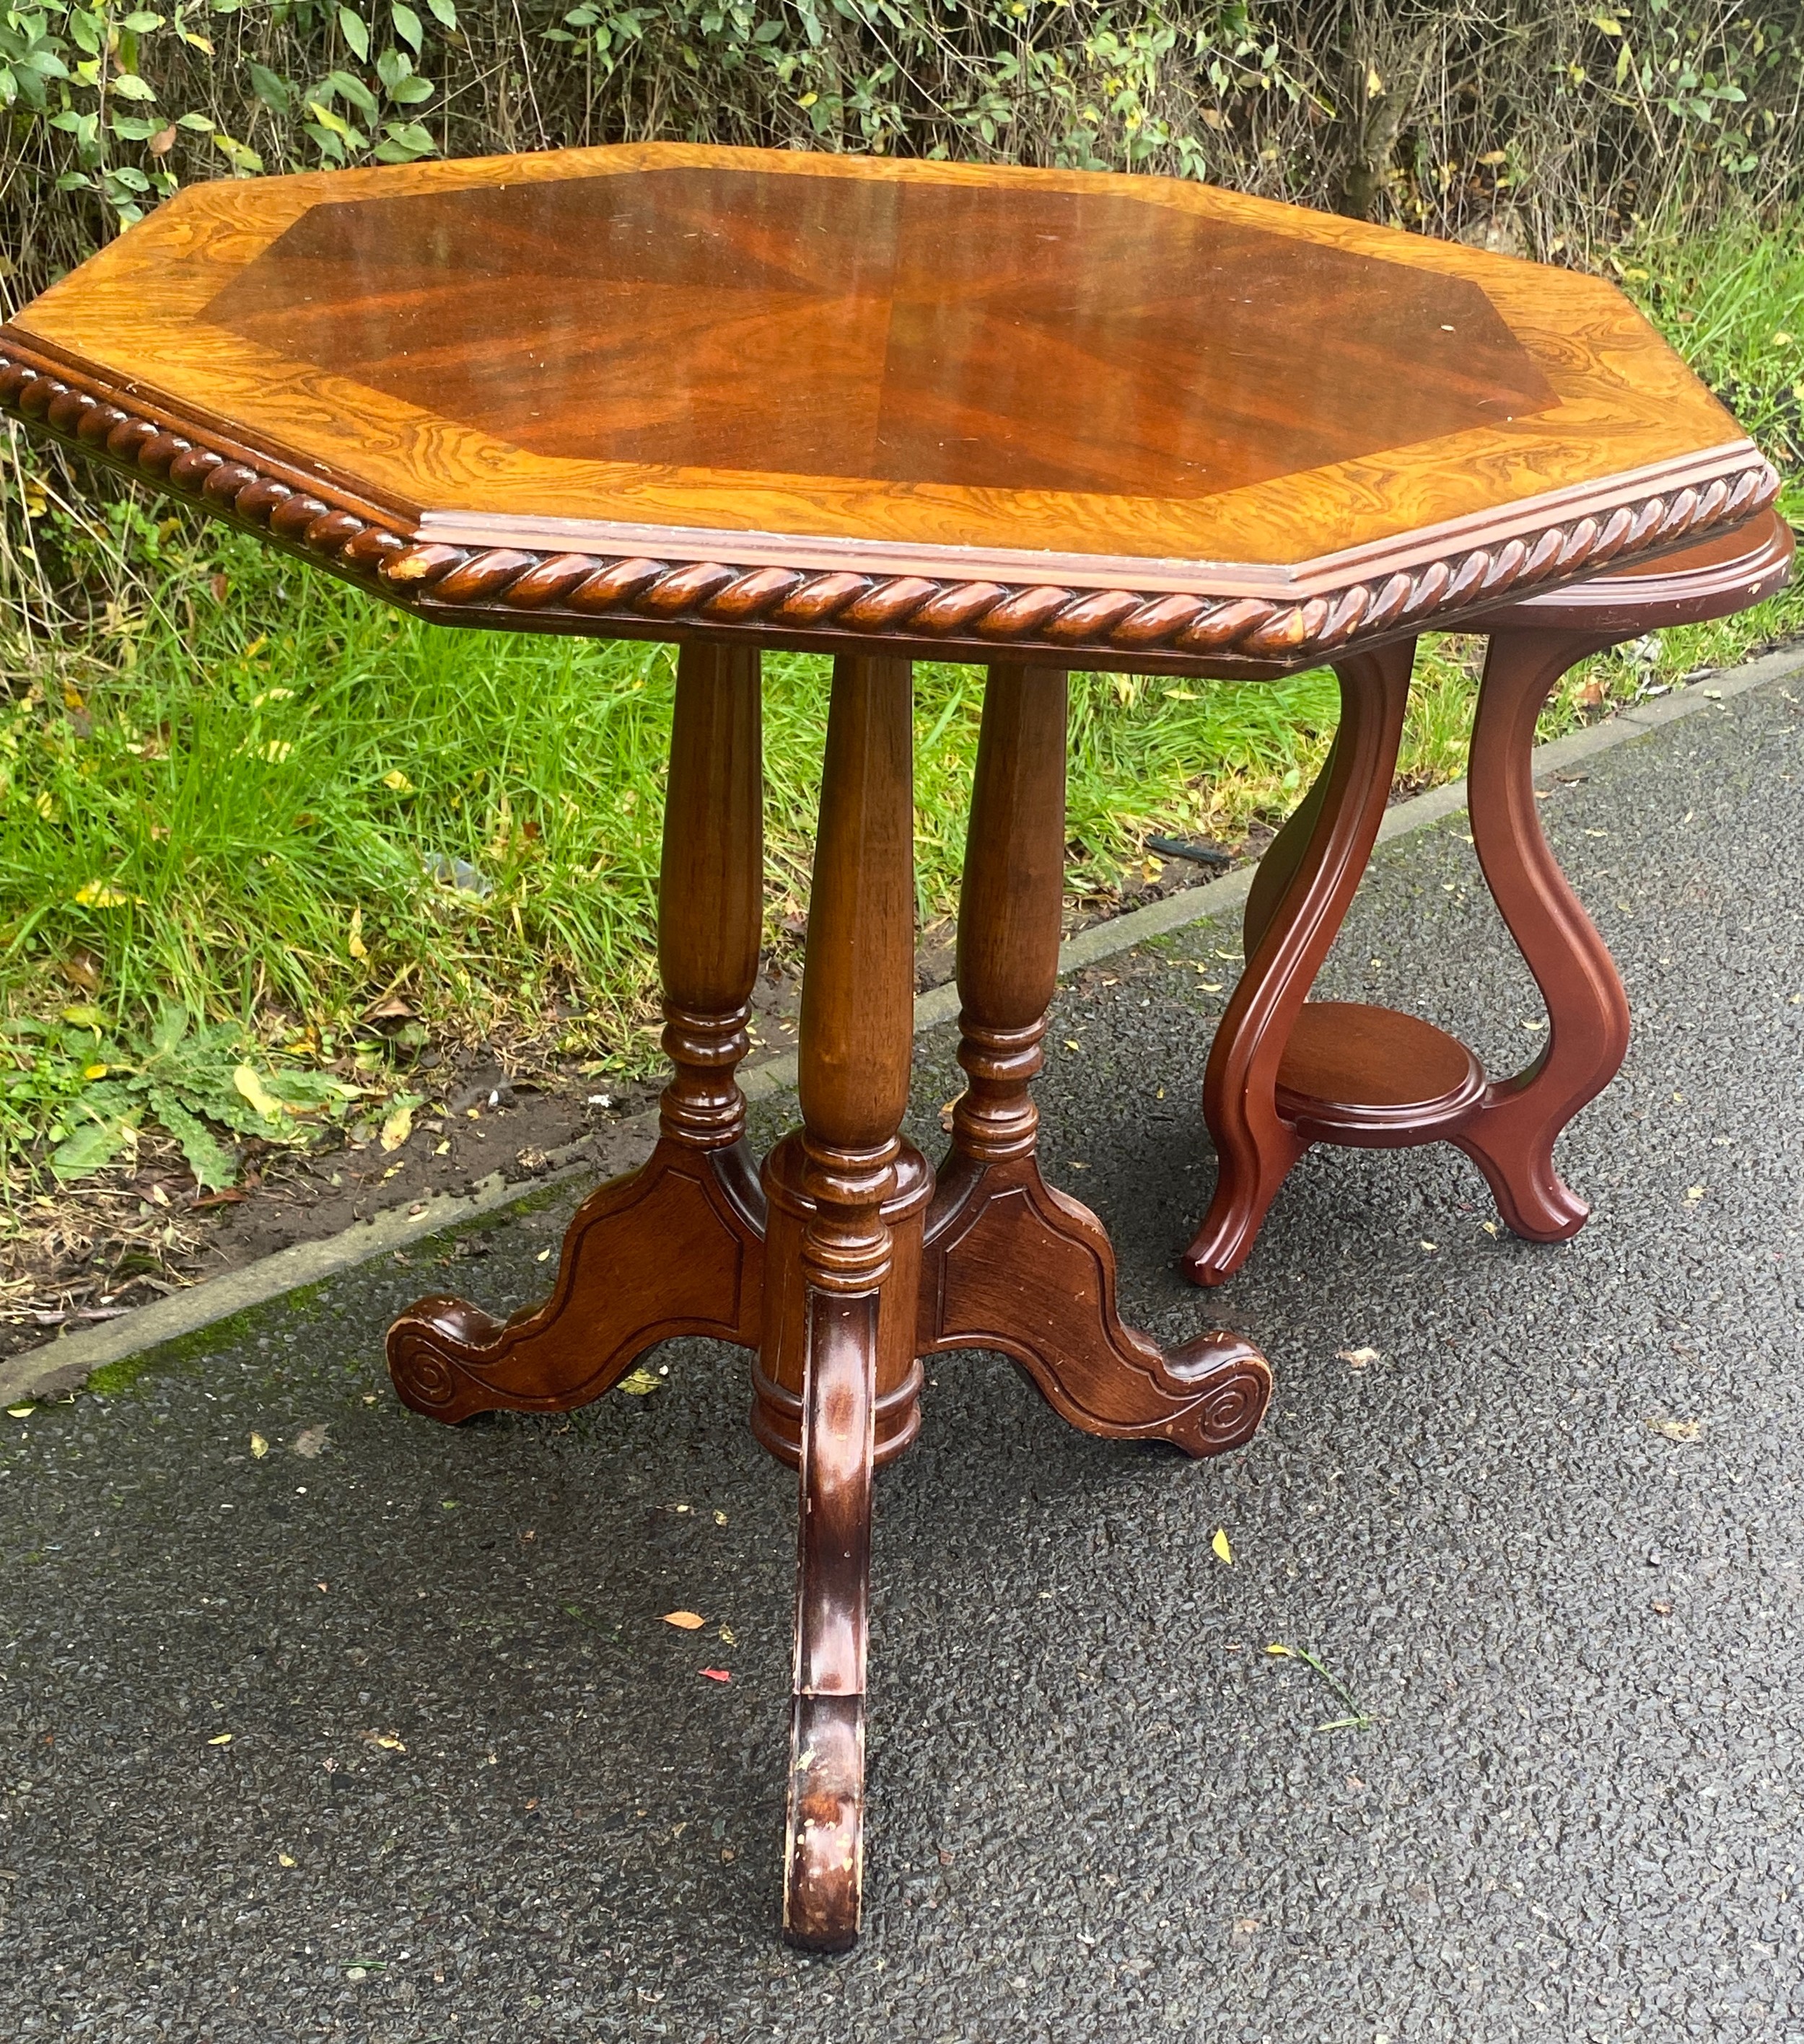 2 Vintage occasional tables, largest measures approximately 26 inches tall 26.5 inches wide - Image 2 of 4